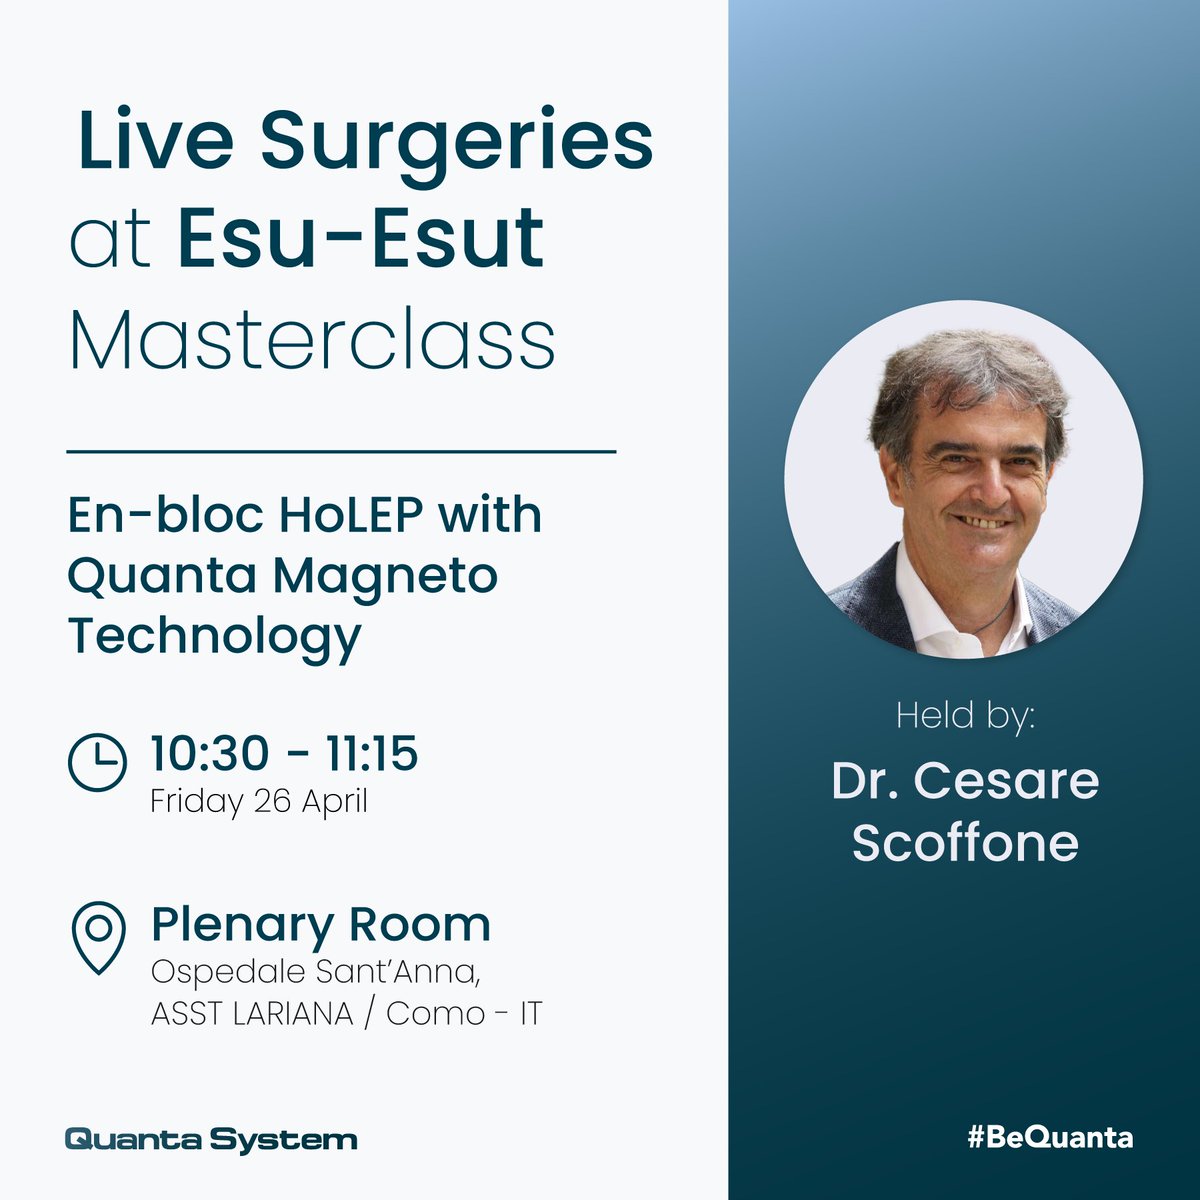 ✅Remember the first live surgery at the ESU-ESUT Masterclass 'En-bloc HoLEP with #QuantaMagnetoTechnology' held by Dr. @scoffonecesare 📆26 April ⏰10:30 - 11:15 🏡Plenary Room, Ospedale Sant'Anna, Como #esubpo24 #UrologyInnovation #QuantaSystem #bequanta